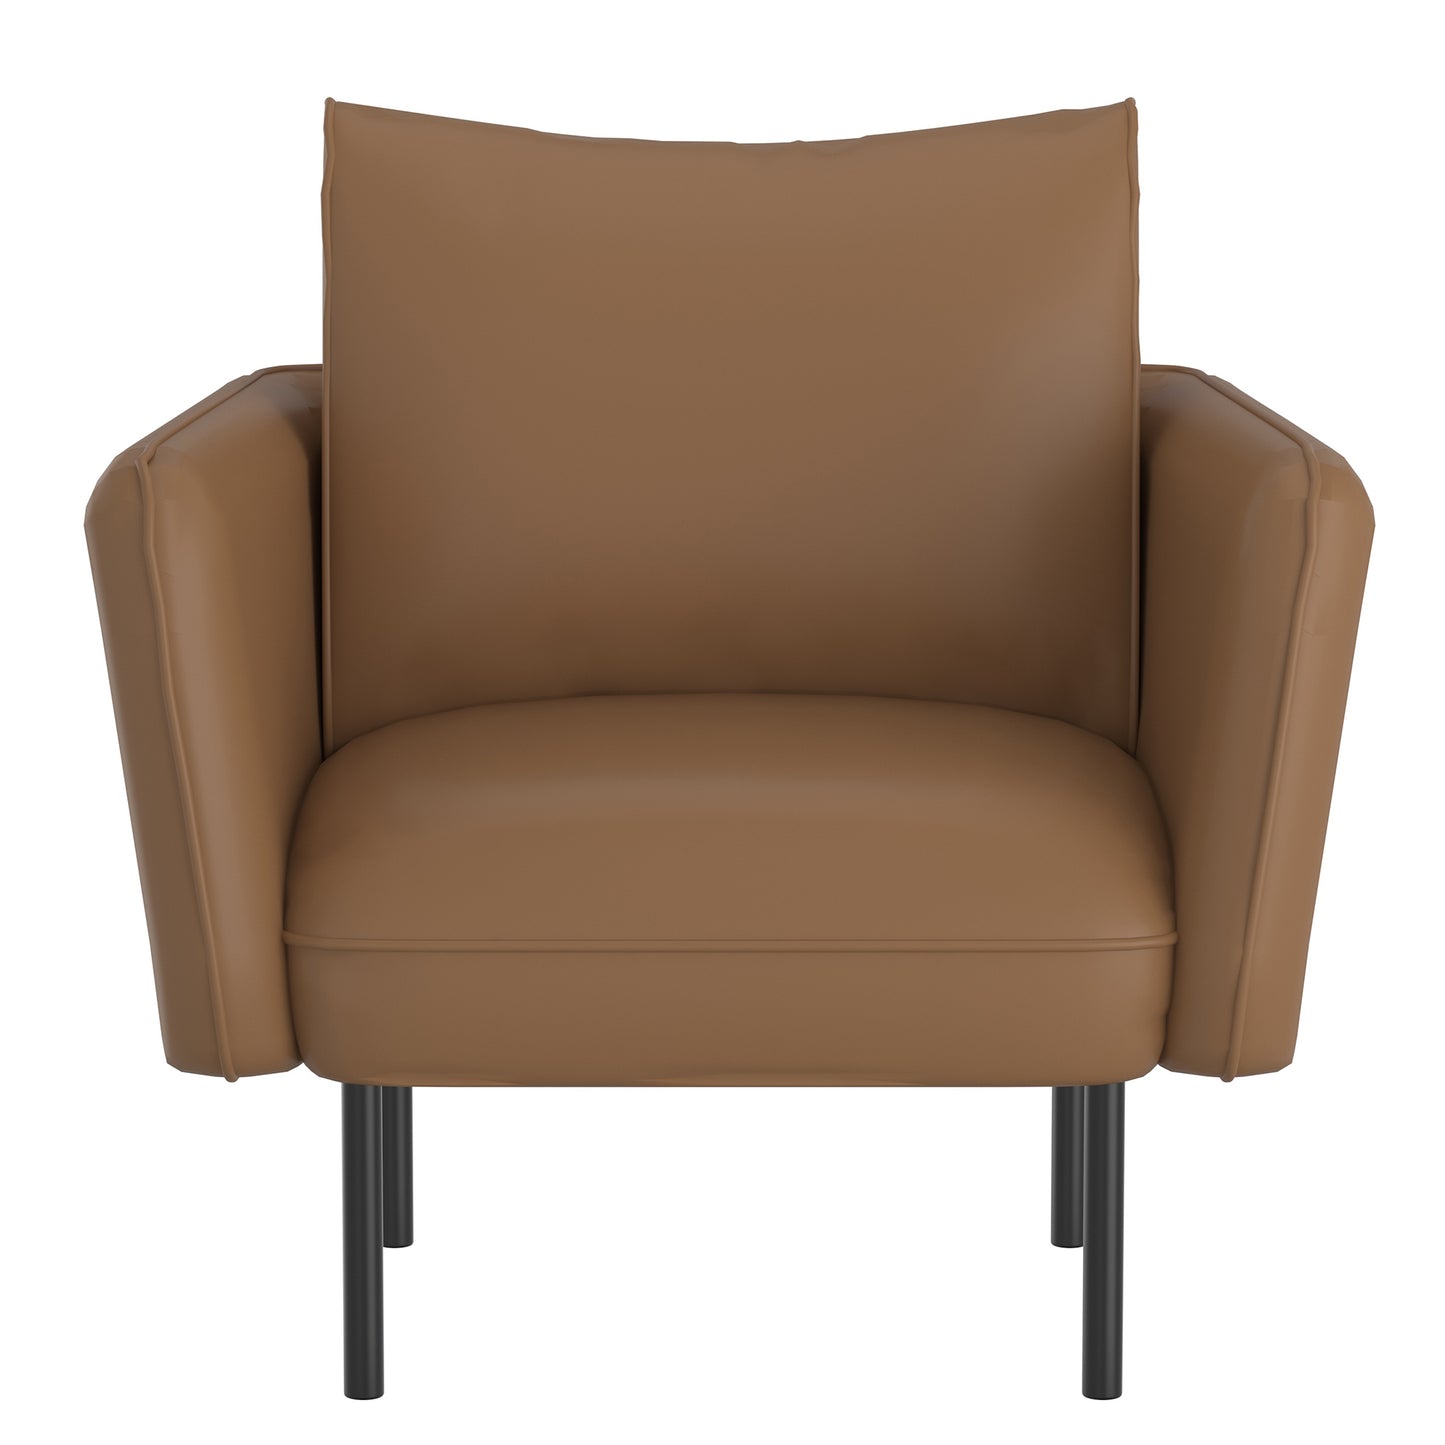 Ryker Accent Chair in Saddle and Black - WW